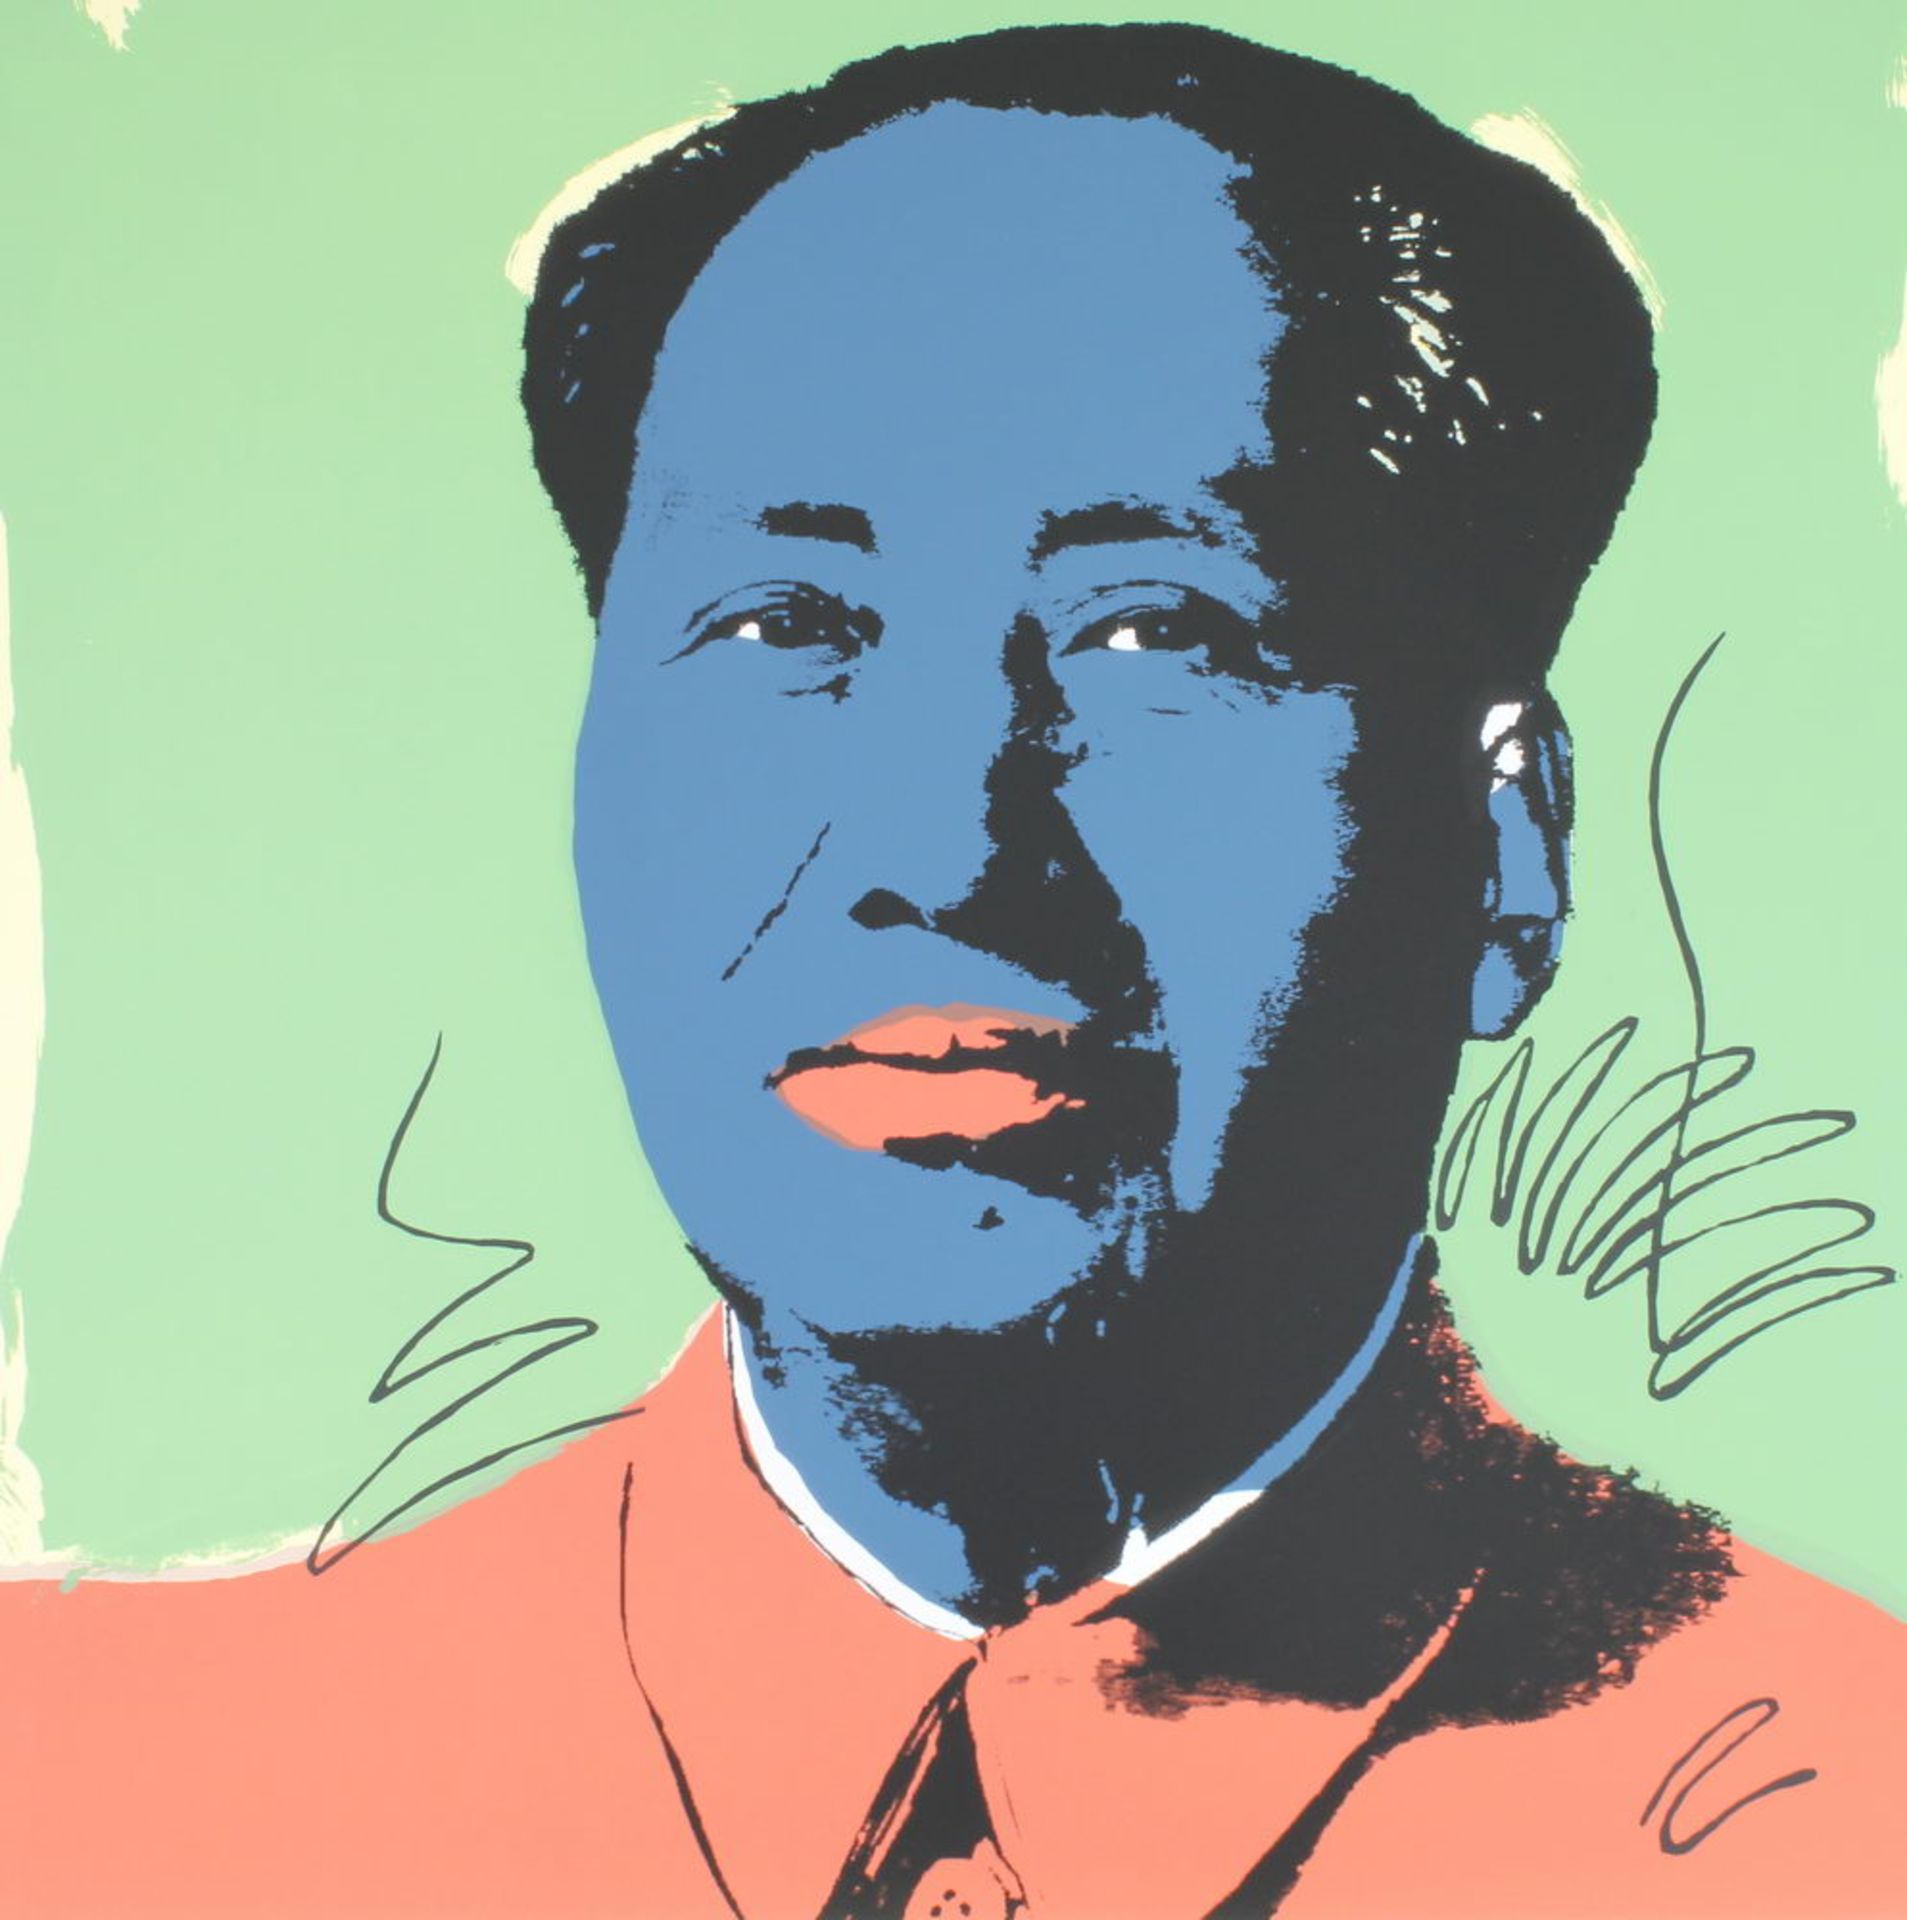 Warhol, Andy (1928 Pittsburgh - 1987 New York), 10 Farbserigrafien, "Mao", published by Sunday B. M - Image 6 of 10